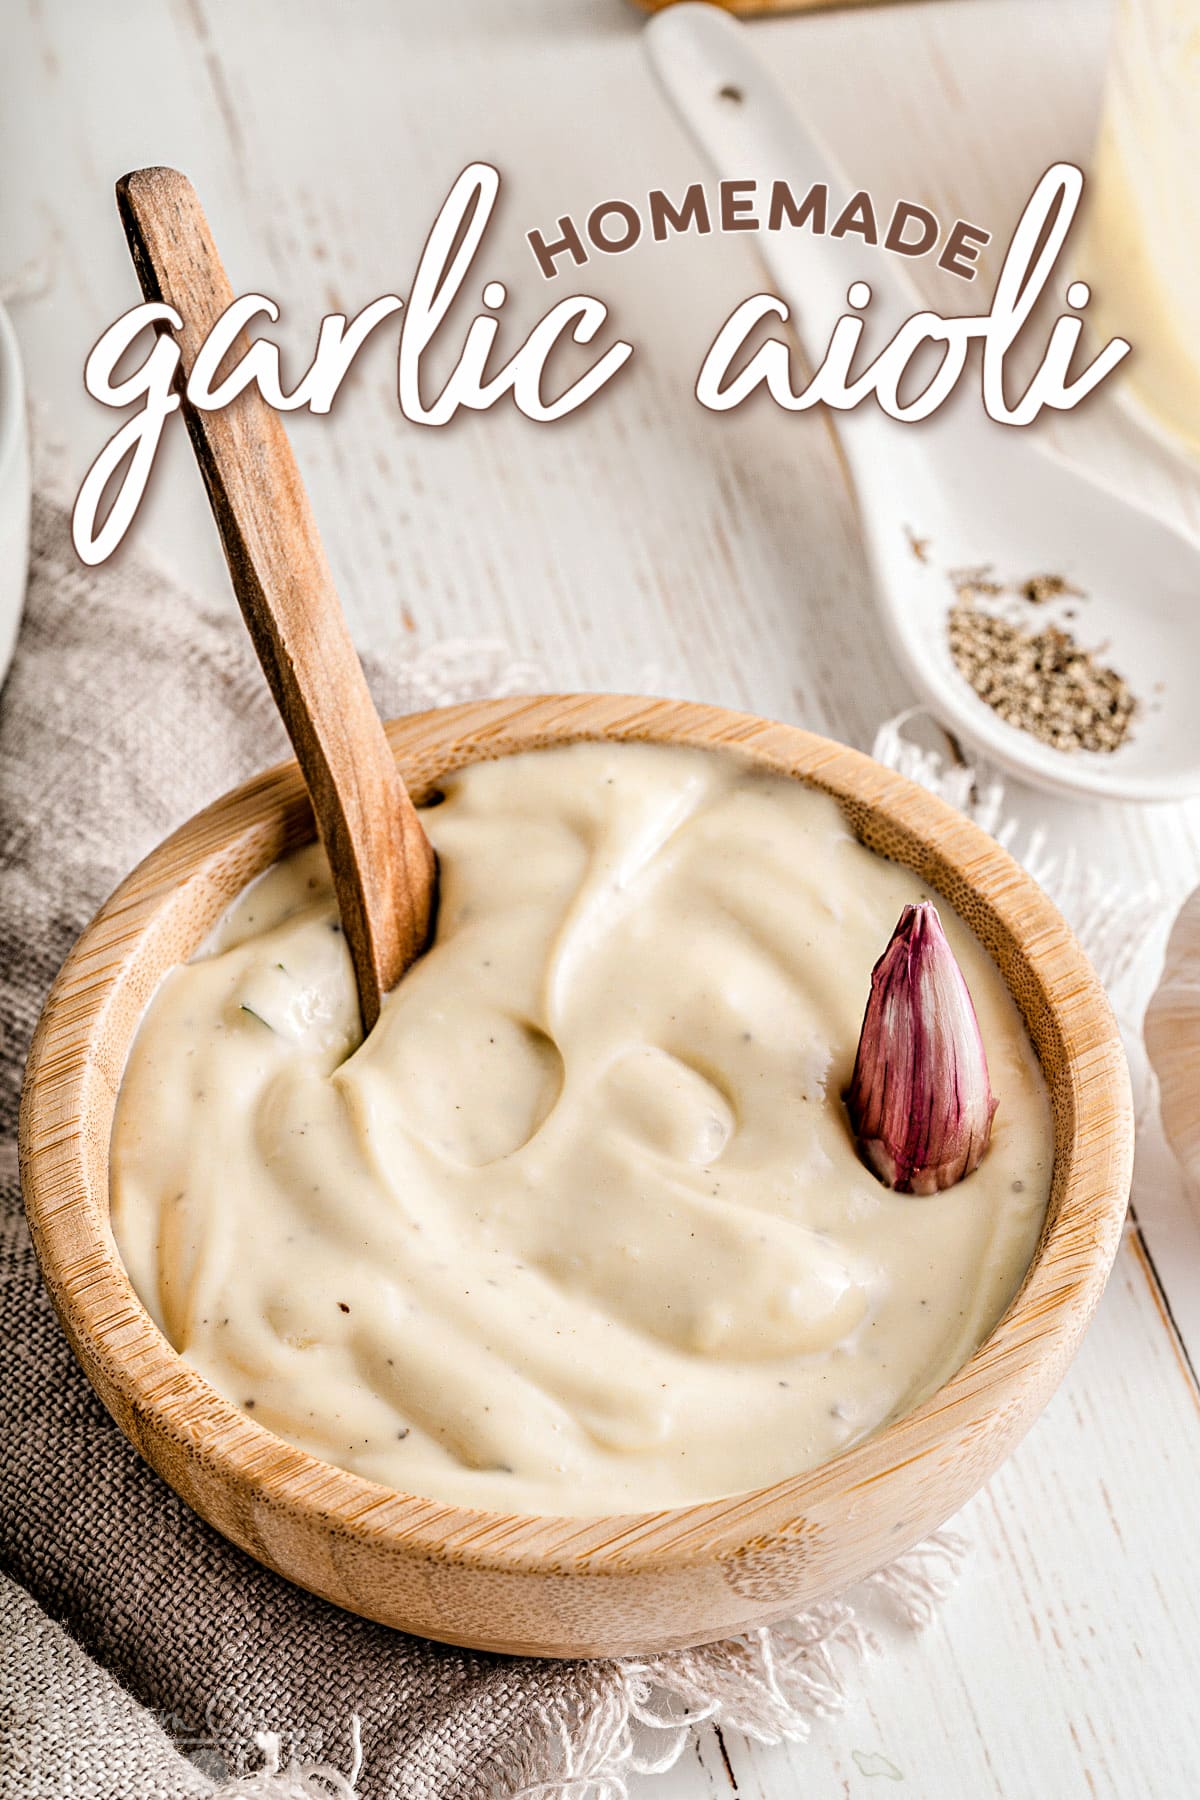 garlic aioli in small wood bowl topped with garlic clove and title overlay at top of image.